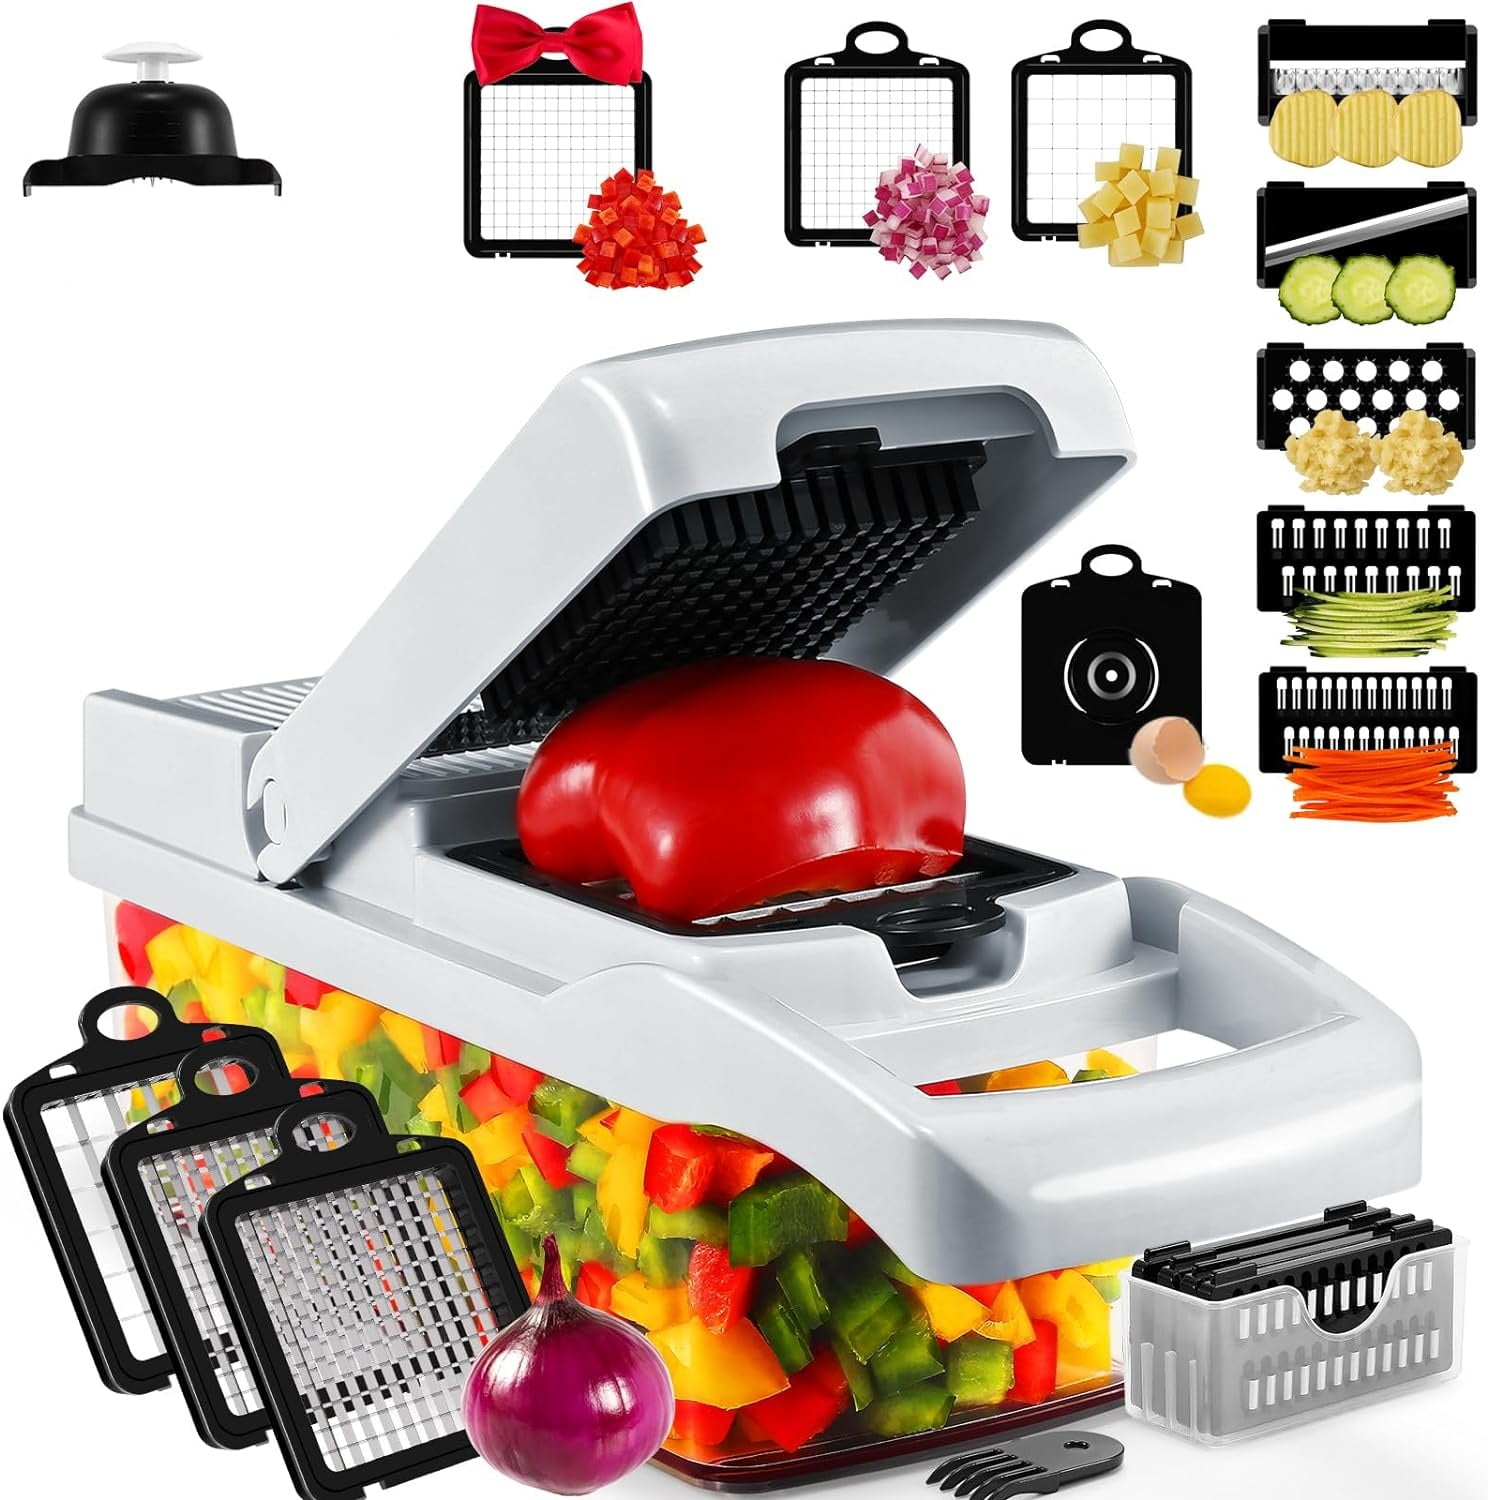 Vegetable chopper with several different attachments to make meal